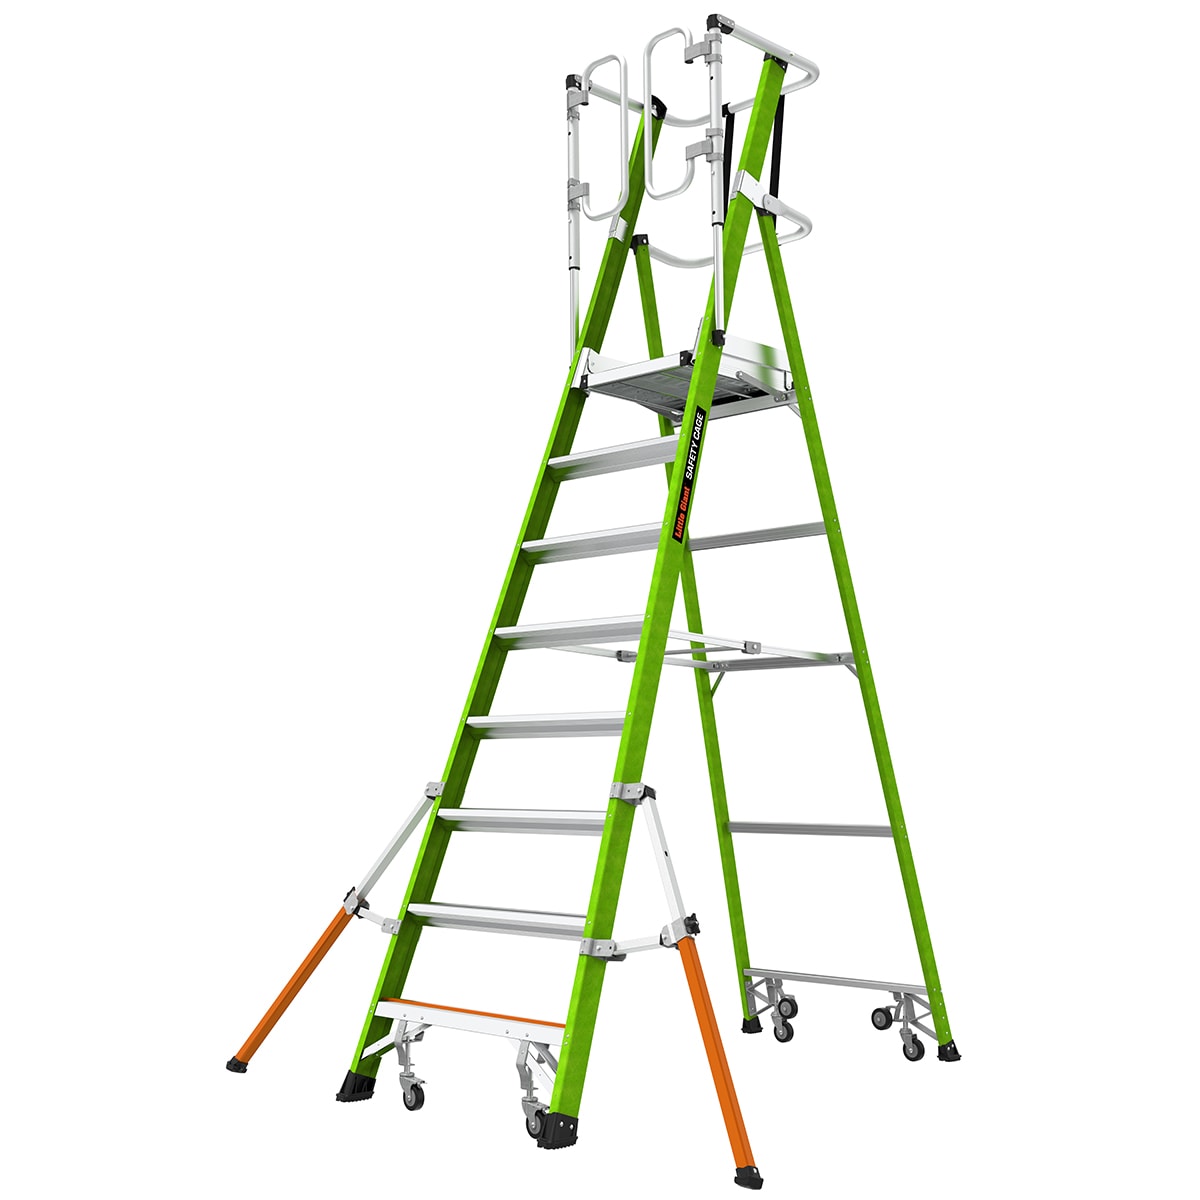 Safety Cage 8-ft Fiberglass Type 1aa- 375-lb Load Capacity Platform Step Ladder in Green | - Little Giant Ladders 19708-146